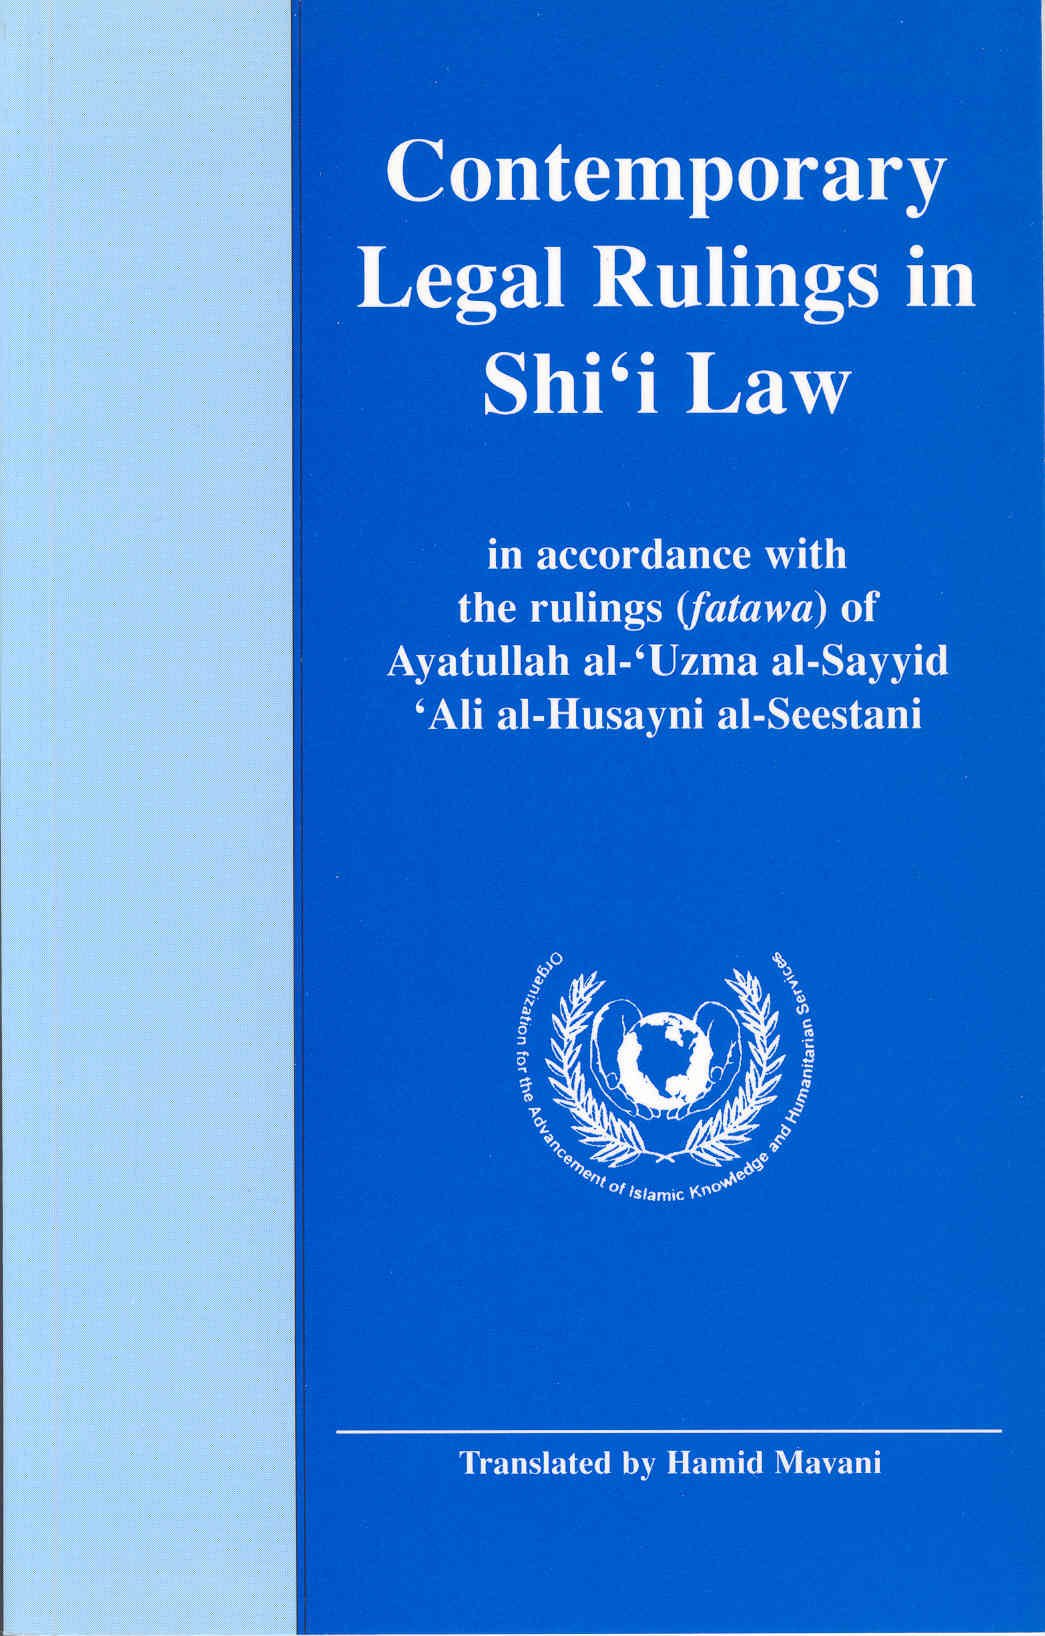 Contemporary Legal Rulings In Shi'i Law